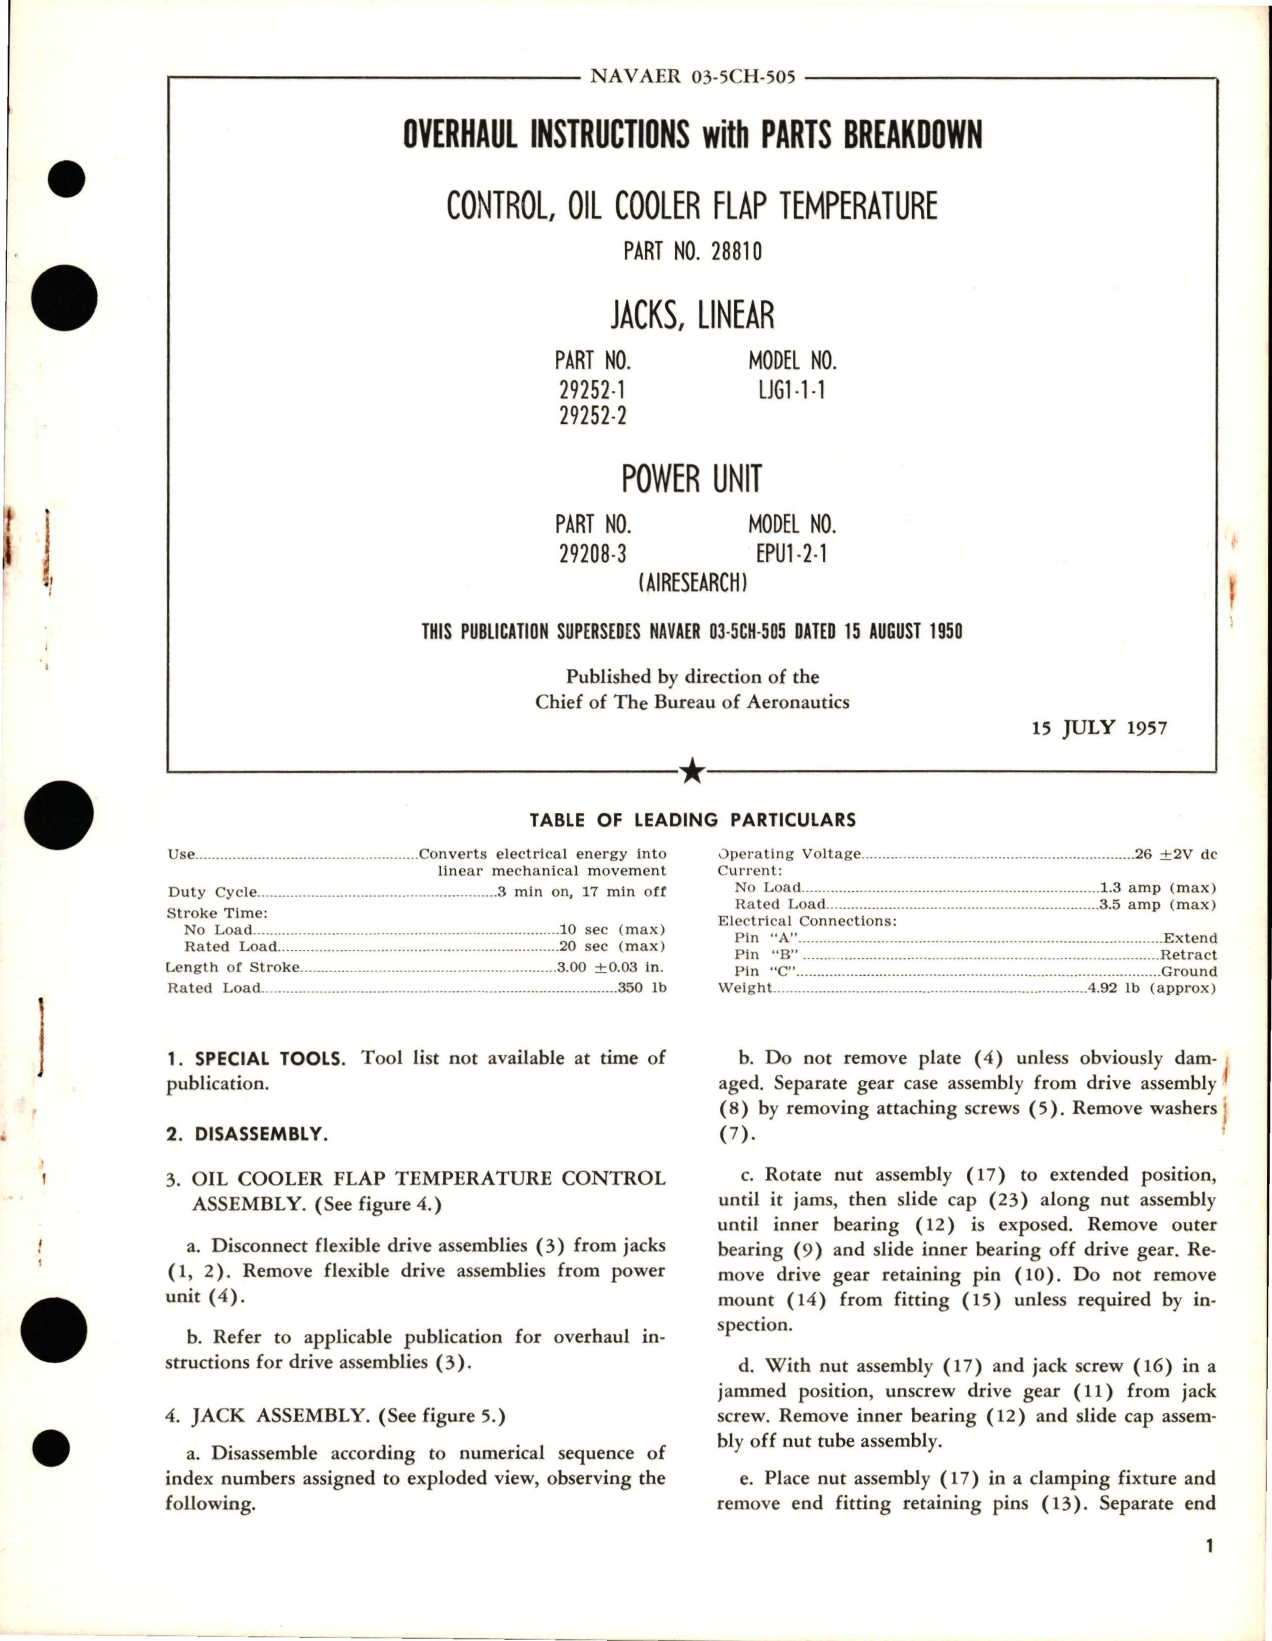 Sample page 1 from AirCorps Library document: Overhaul Instructions with Parts Breakdown for Oil Cooler Flap Temperature Control, Linear Jacks and Power Unit 